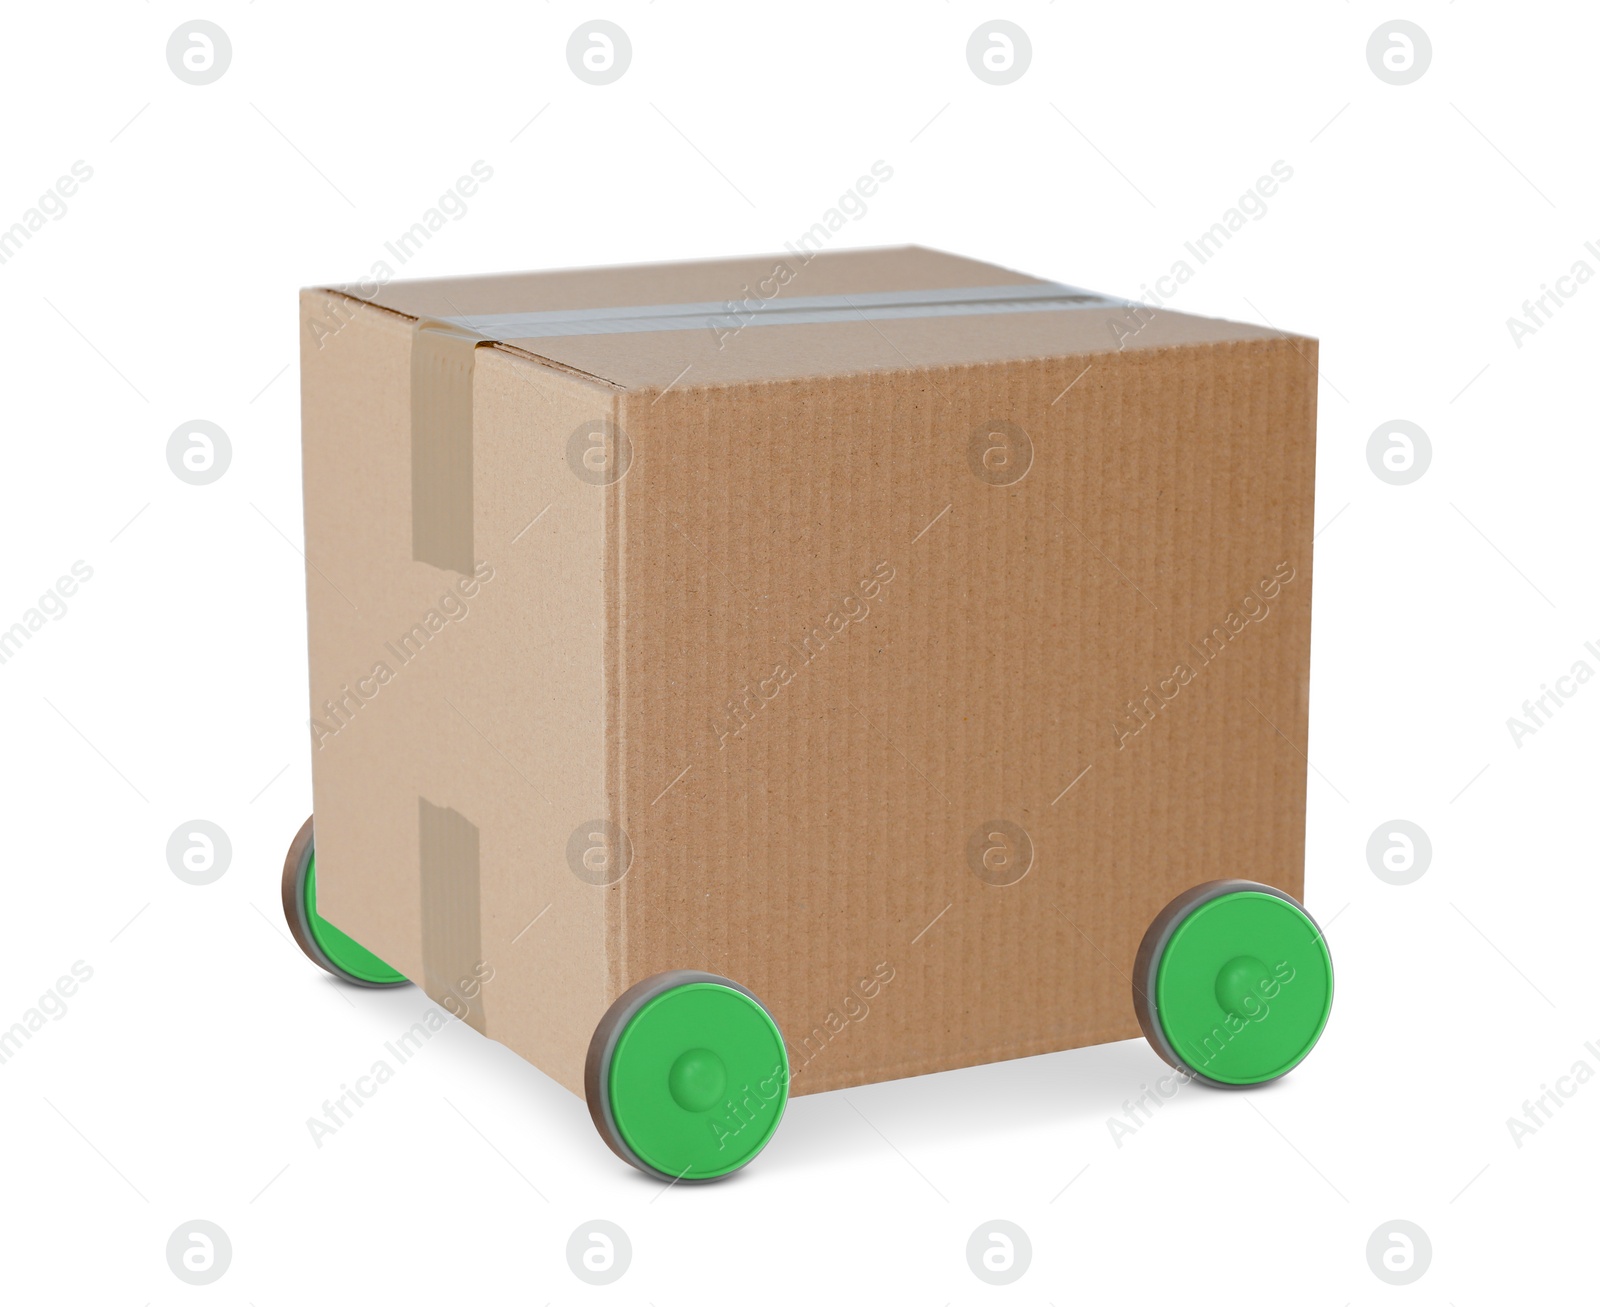 Image of Cardboard box on wheels against white background. Transportation and delivery service